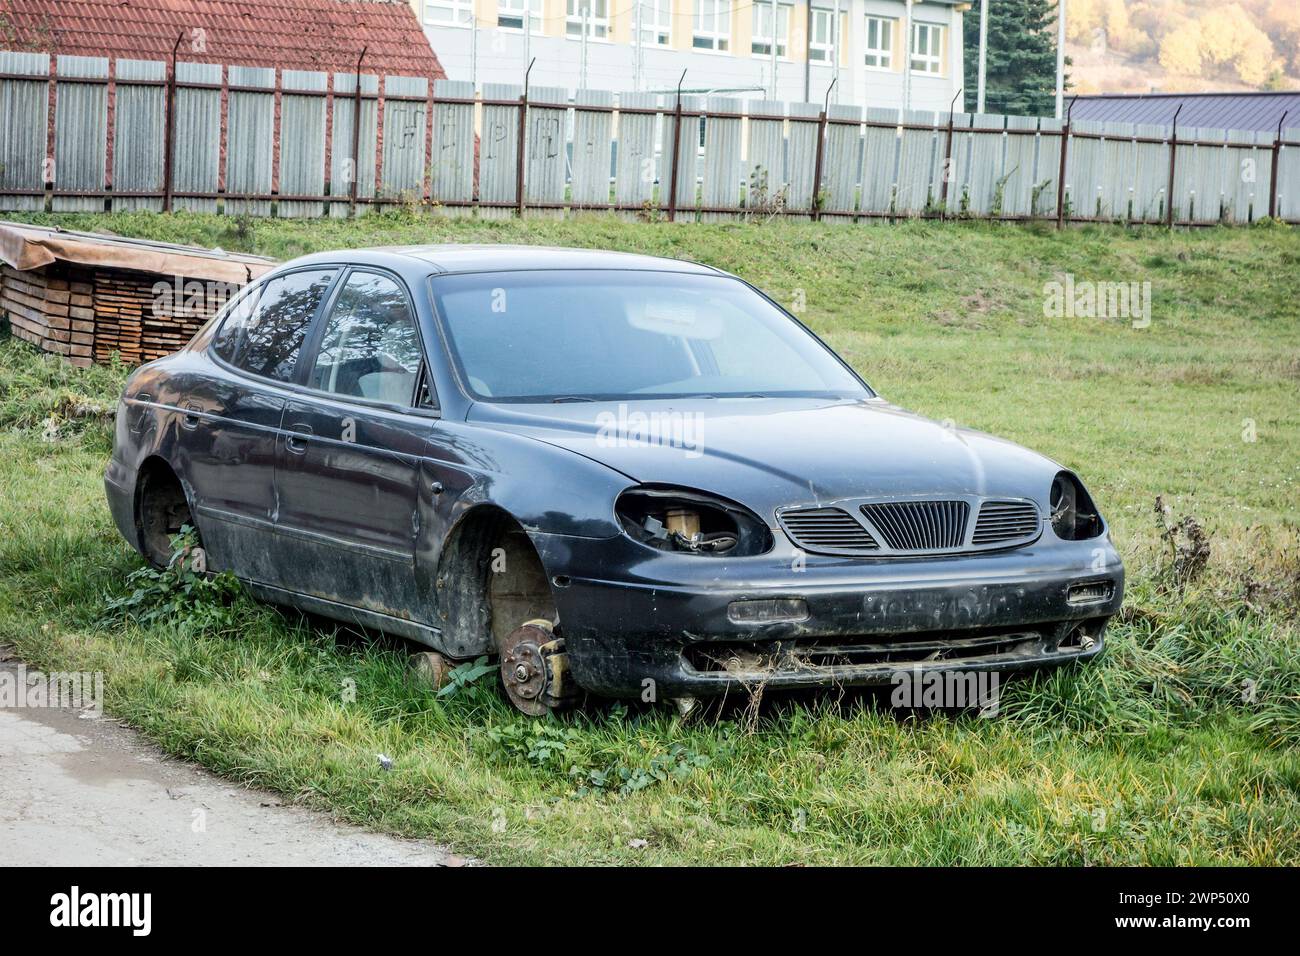 ZBOROV NAD BYSTRICOU - OCTOBER 30, 2015: Abandoned wreck of Daewoo Leganza sedan car without any wheels Stock Photo